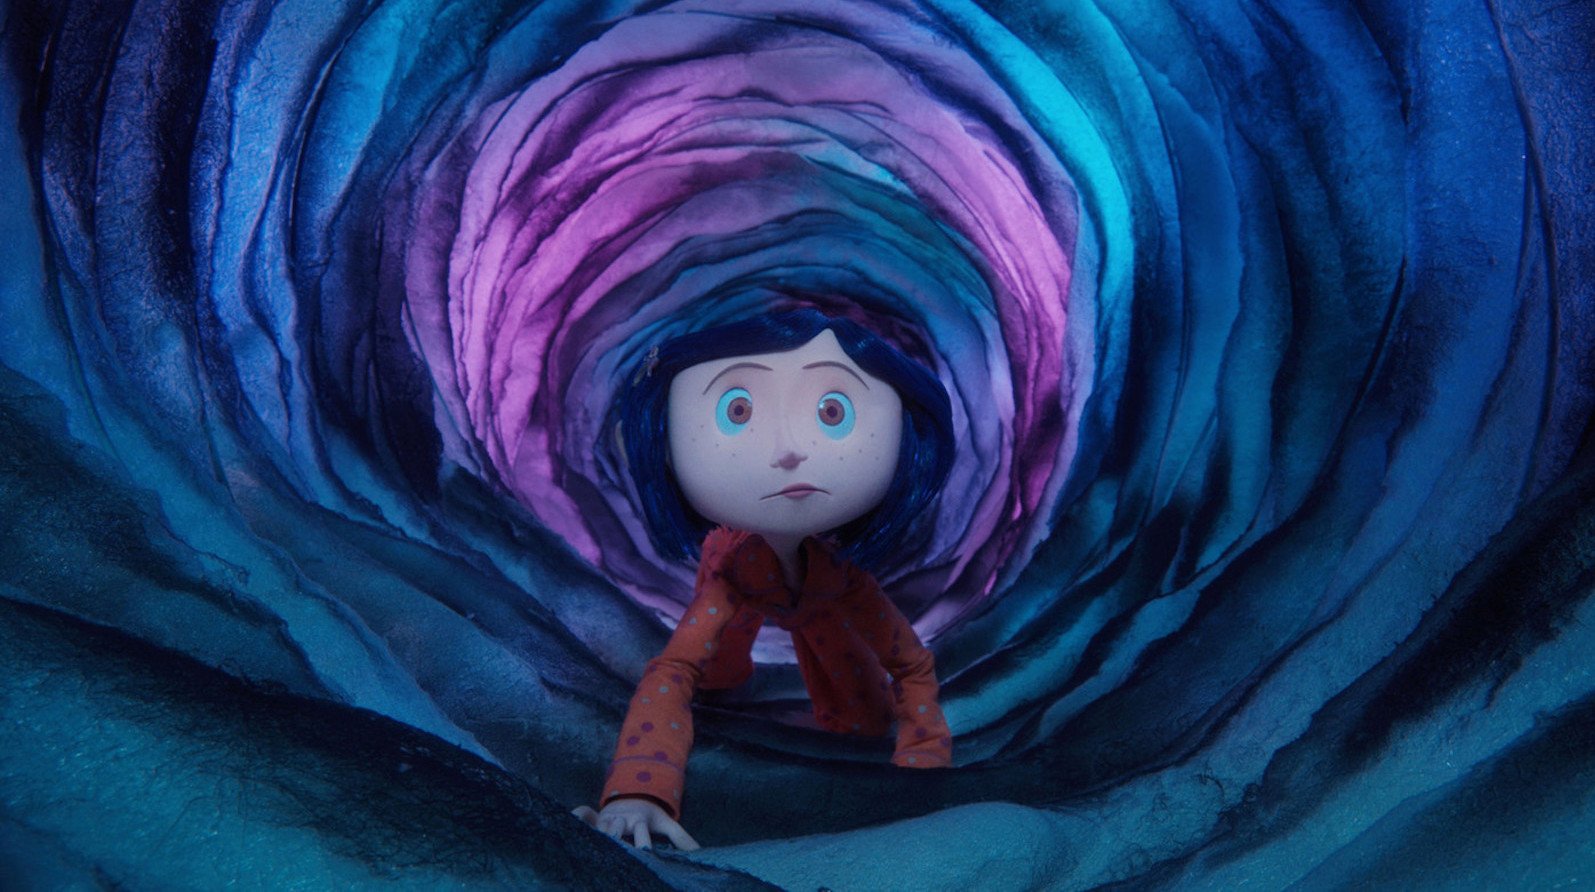 An animated girl crawls through a purple and blue tunnel.